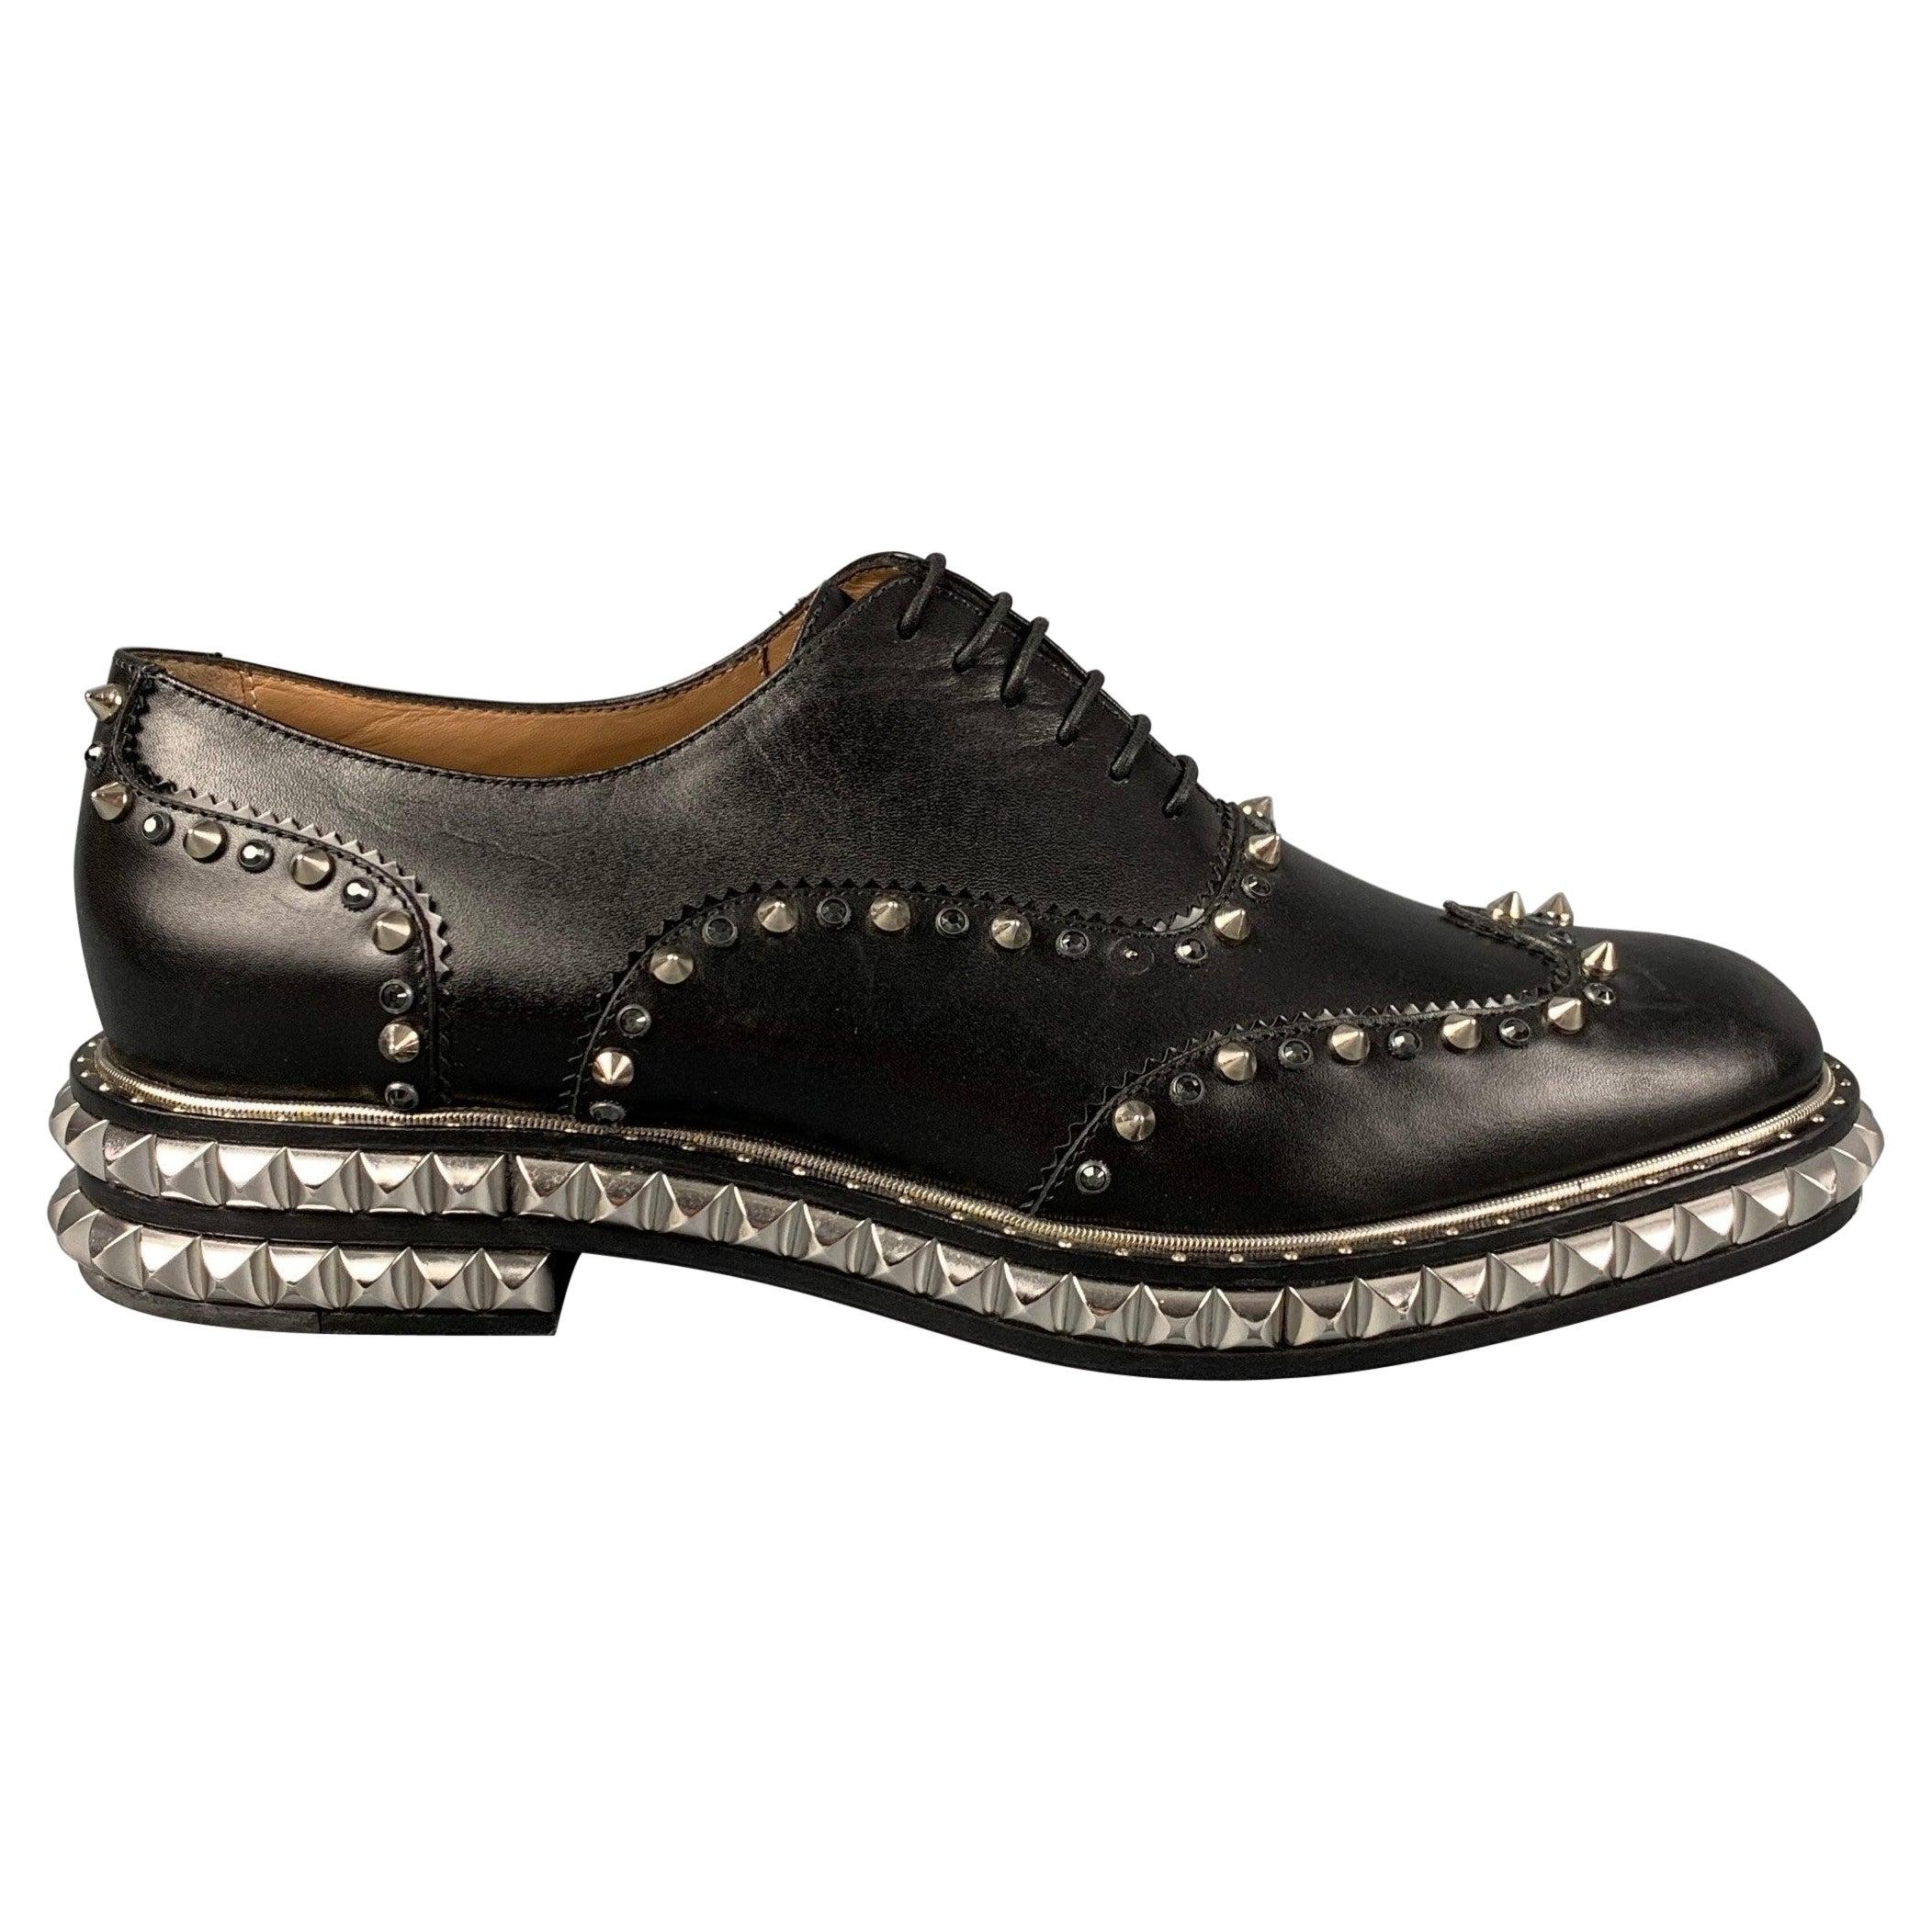 CHRISTIAN LOUBOUTIN Size 8 Black Studded Leather Wingtip Lace Up Shoes For Sale